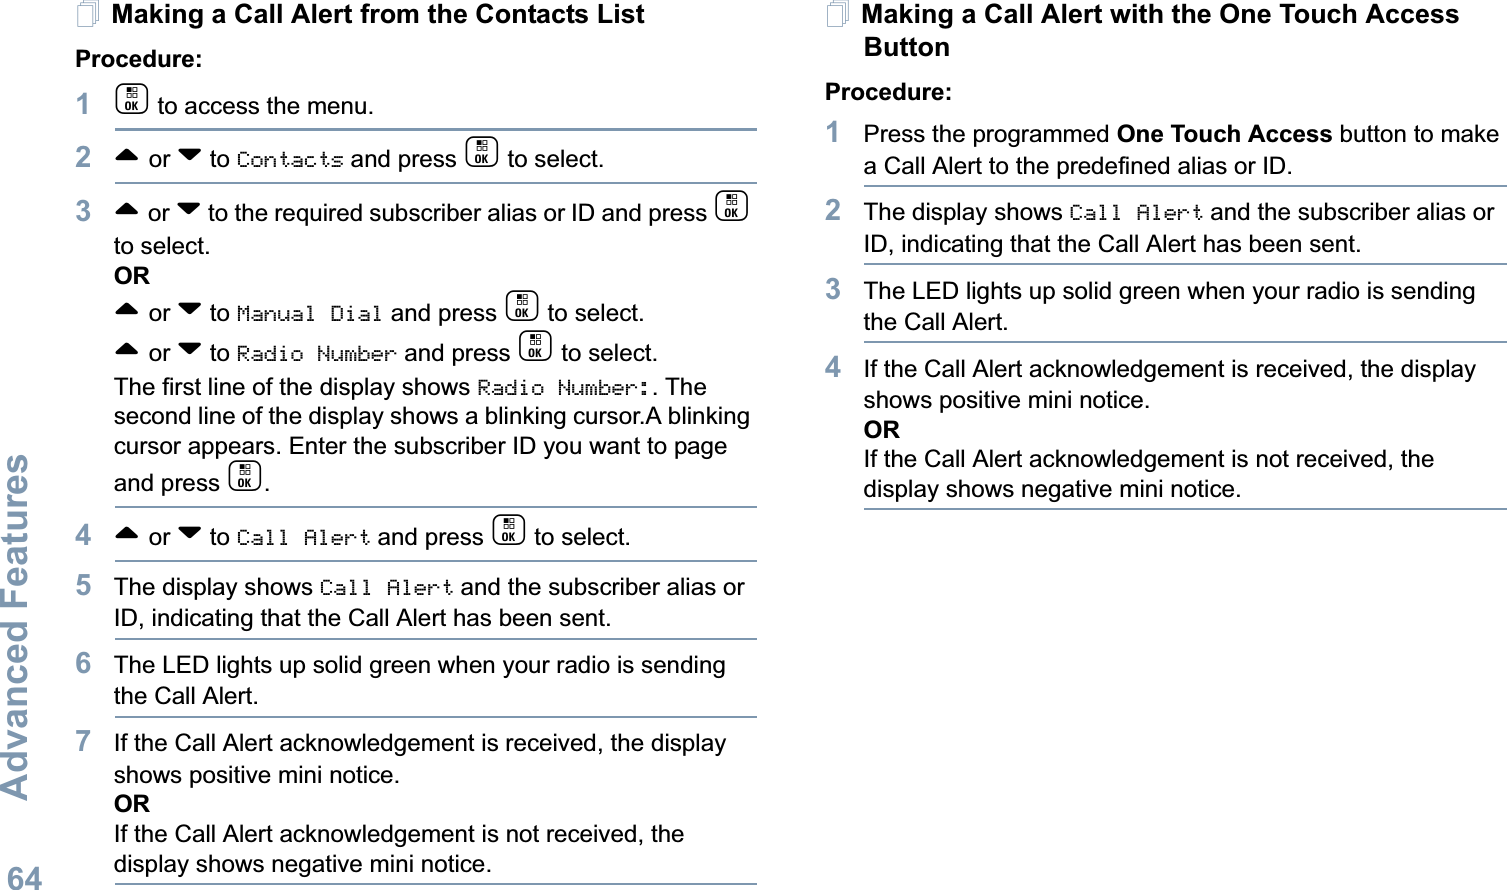 Advanced FeaturesEnglish64Making a Call Alert from the Contacts ListProcedure:1c to access the menu.2^ or v to Contacts and press c to select.3^ or v to the required subscriber alias or ID and press c to select.OR^ or v to Manual Dial and press c to select. ^ or v to Radio Number and press c to select.The first line of the display shows Radio Number:. The second line of the display shows a blinking cursor.A blinking cursor appears. Enter the subscriber ID you want to page and press c.4^ or v to Call Alert and press c to select.5The display shows Call Alert and the subscriber alias or ID, indicating that the Call Alert has been sent. 6The LED lights up solid green when your radio is sending the Call Alert.7If the Call Alert acknowledgement is received, the display shows positive mini notice.ORIf the Call Alert acknowledgement is not received, the display shows negative mini notice.Making a Call Alert with the One Touch Access Button Procedure:1Press the programmed One Touch Access button to make a Call Alert to the predefined alias or ID.2The display shows Call Alert and the subscriber alias or ID, indicating that the Call Alert has been sent.  3The LED lights up solid green when your radio is sending the Call Alert.4If the Call Alert acknowledgement is received, the display shows positive mini notice.ORIf the Call Alert acknowledgement is not received, the display shows negative mini notice.